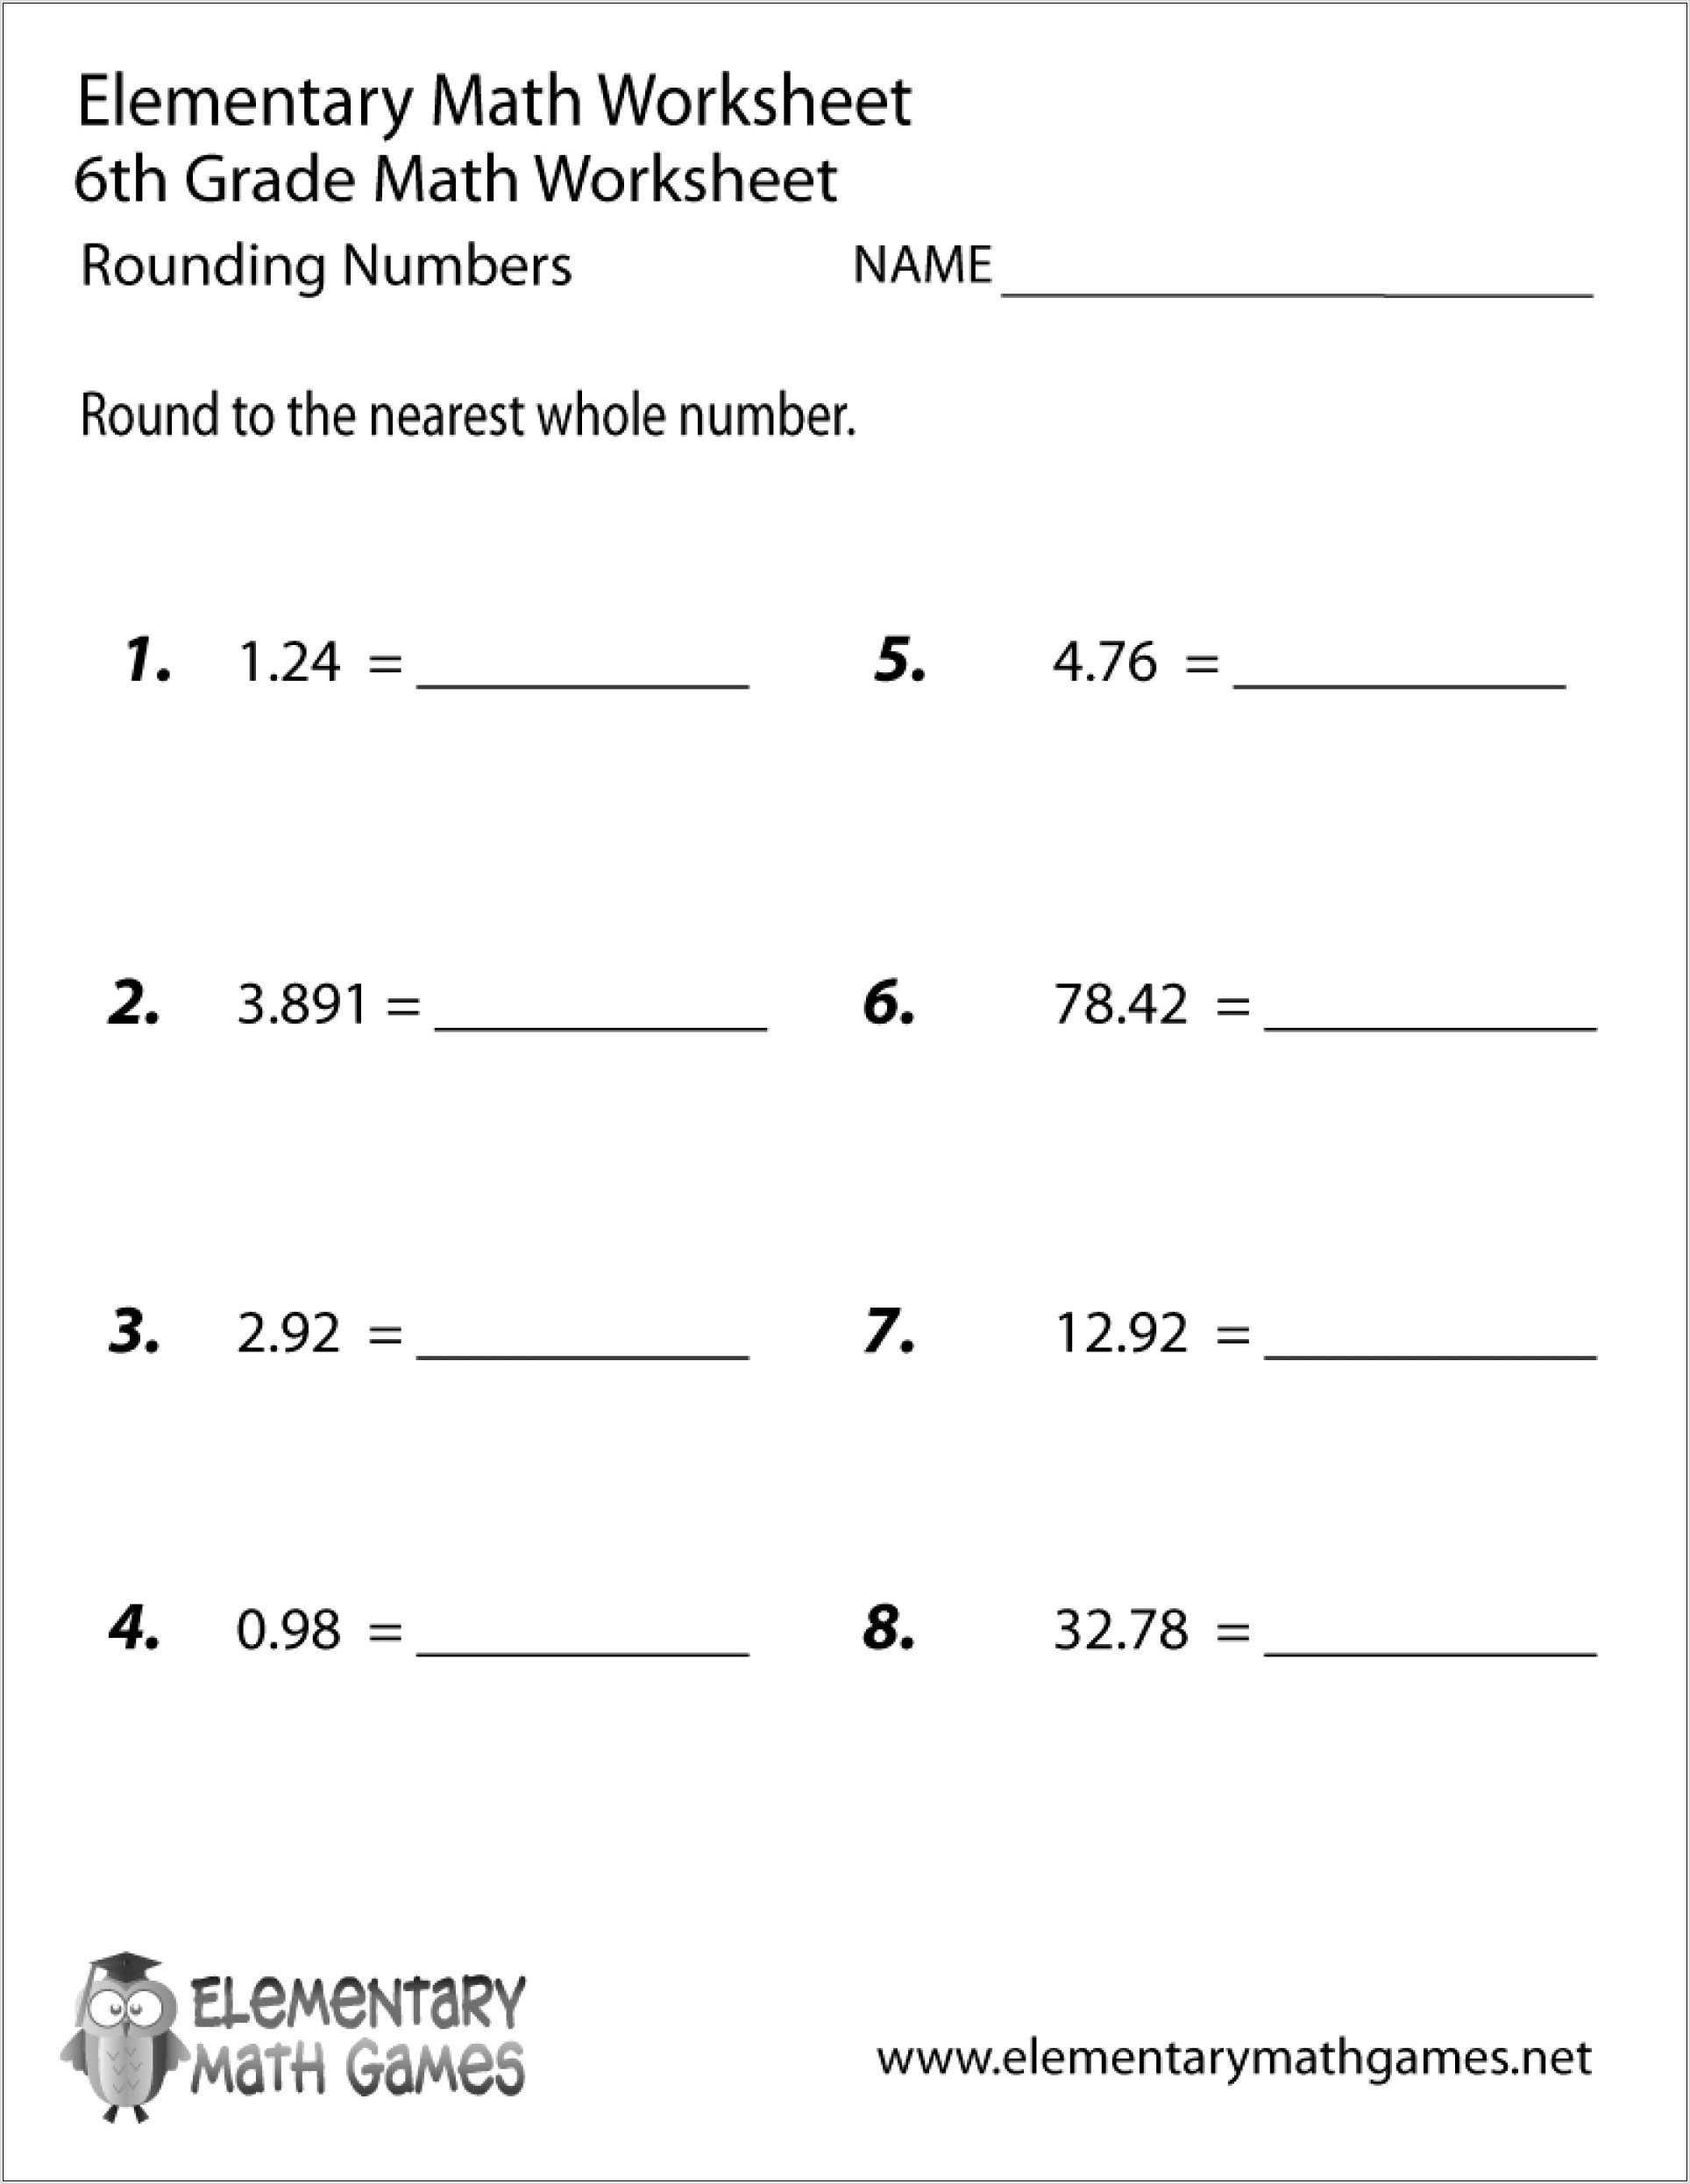 Rounding Numbers Worksheets For 6th Grade